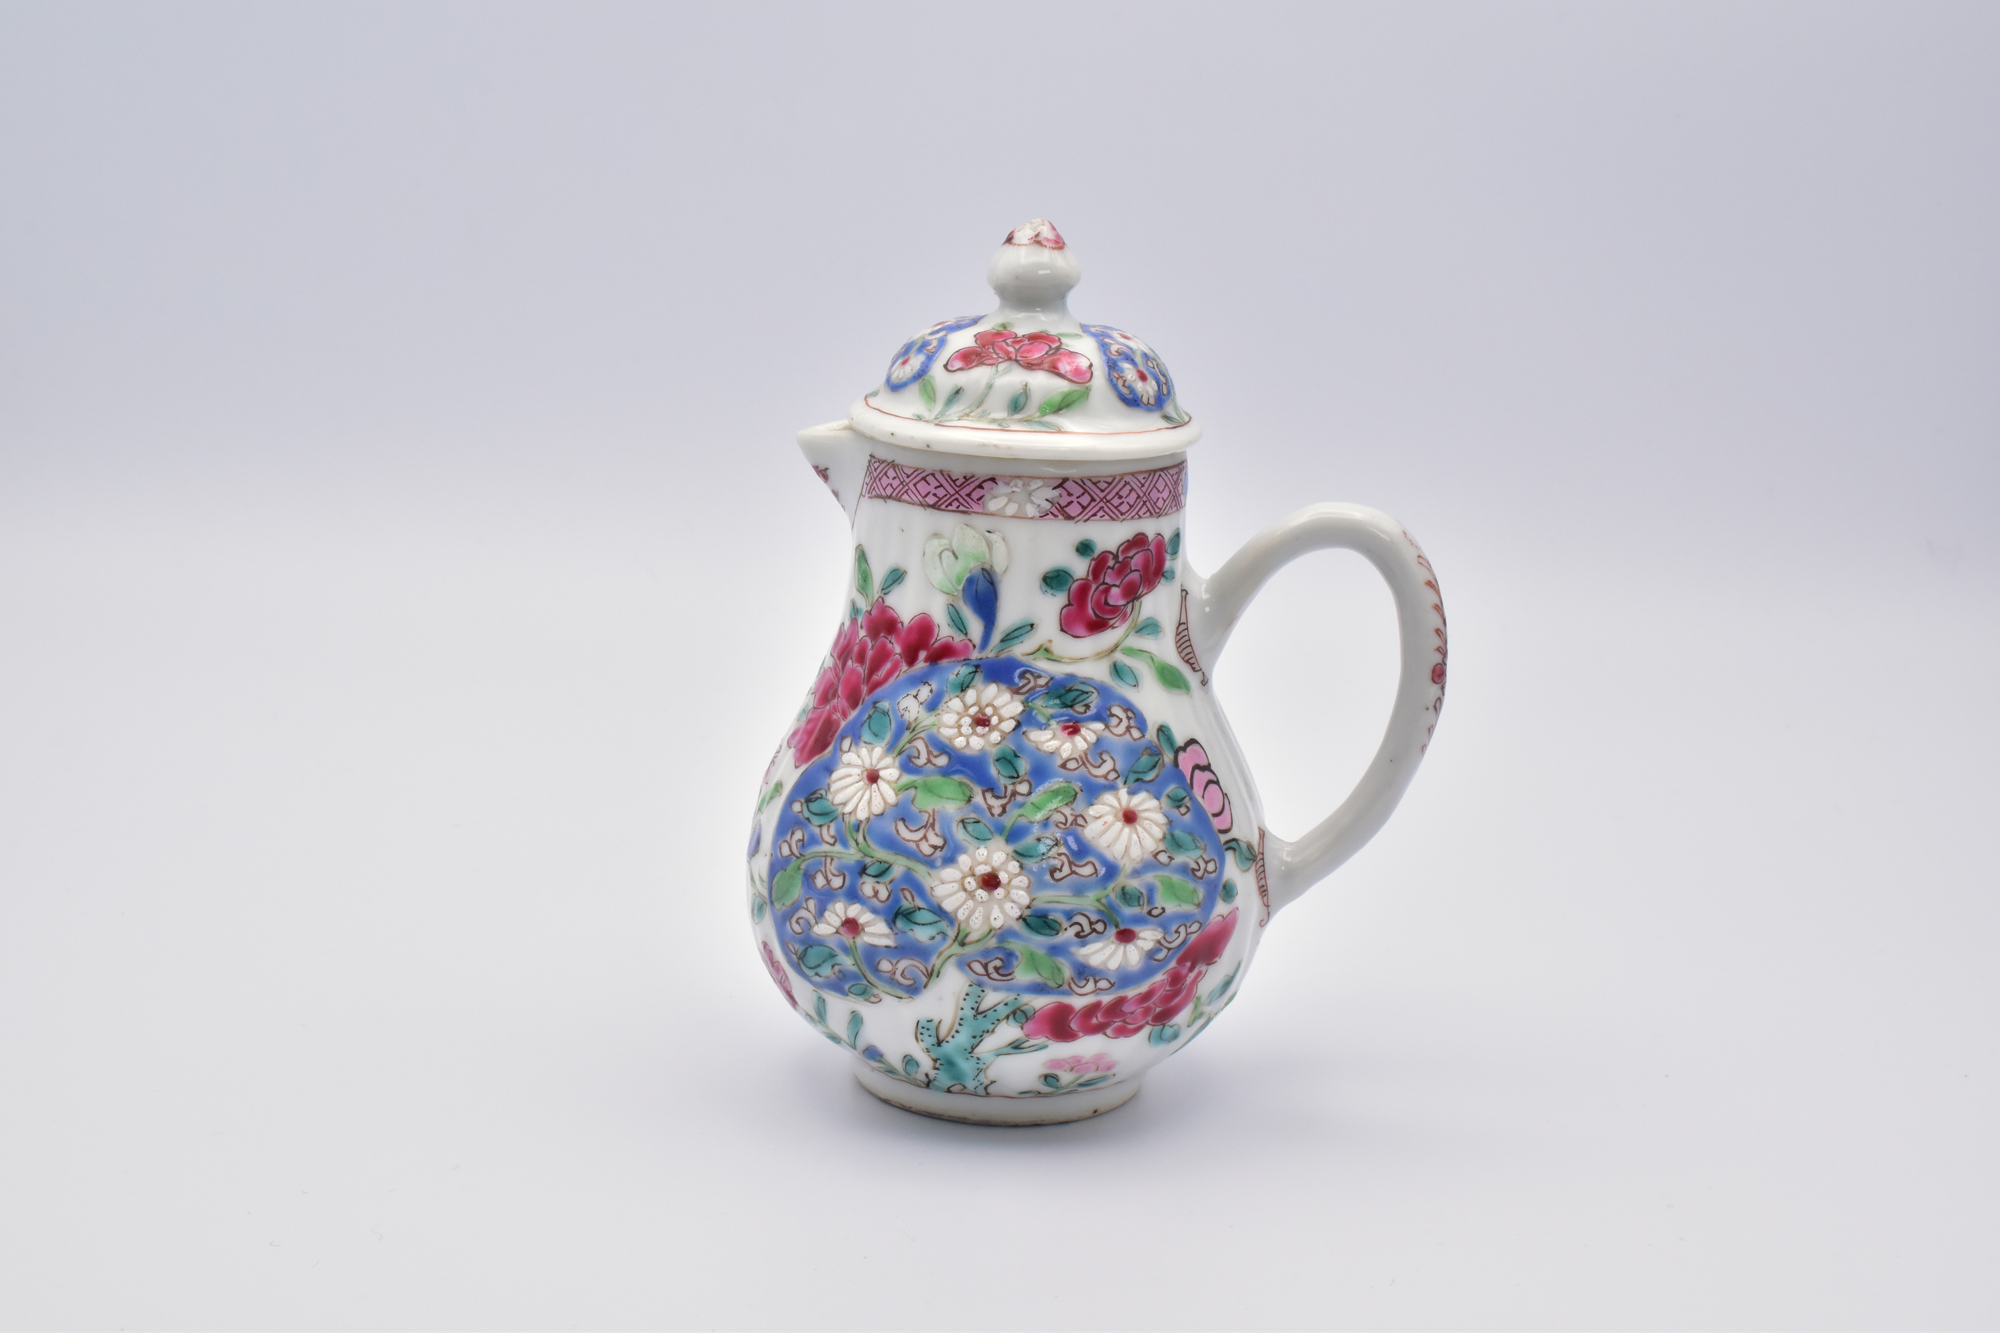 A CHINESE EXPORT ‘FAMILLE-ROSE’ PORCELAIN CREAM JUG AND COVER, YONGZHENG PERIOD, 1723 – 1735